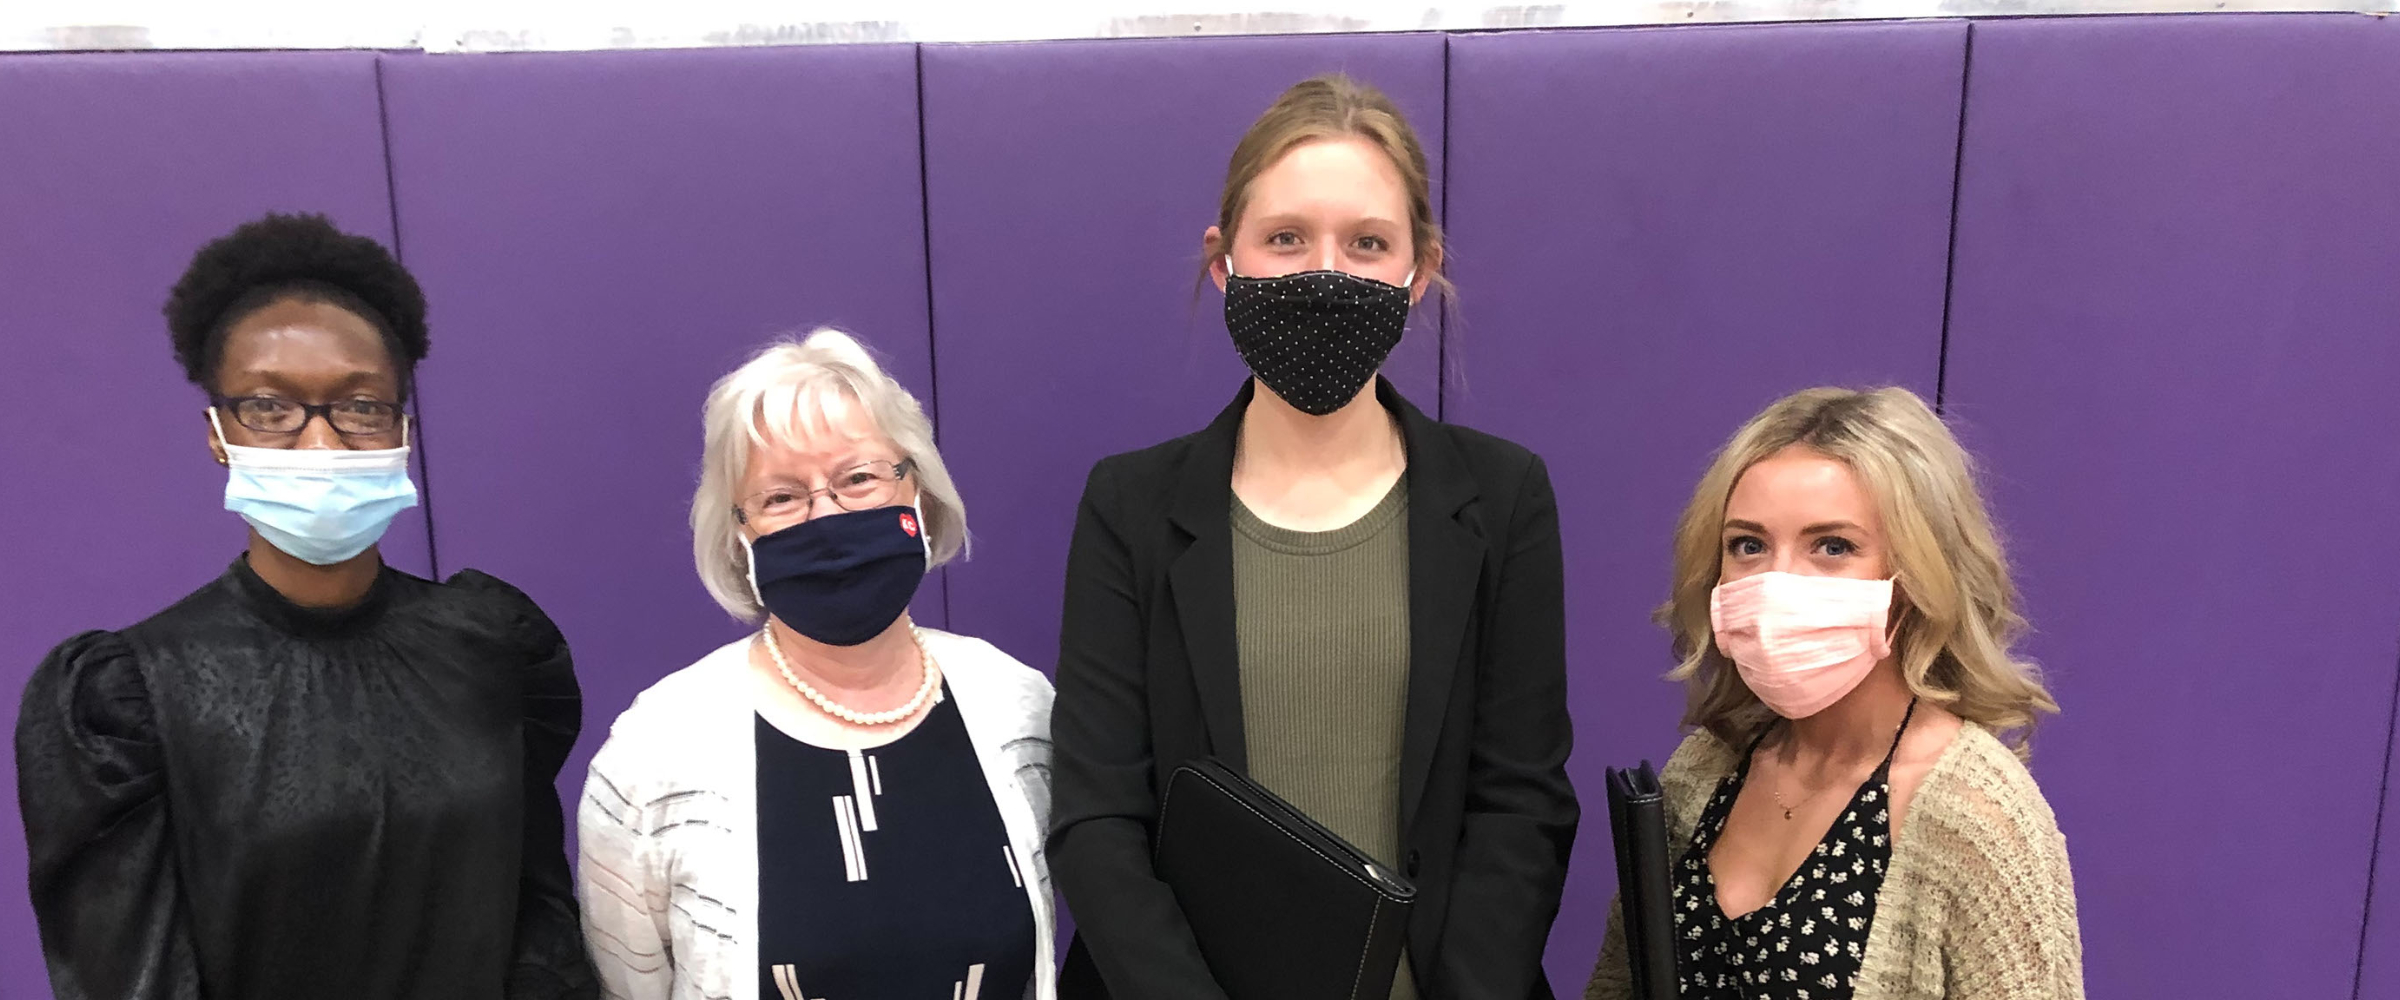 Four women posed in-line with masks on